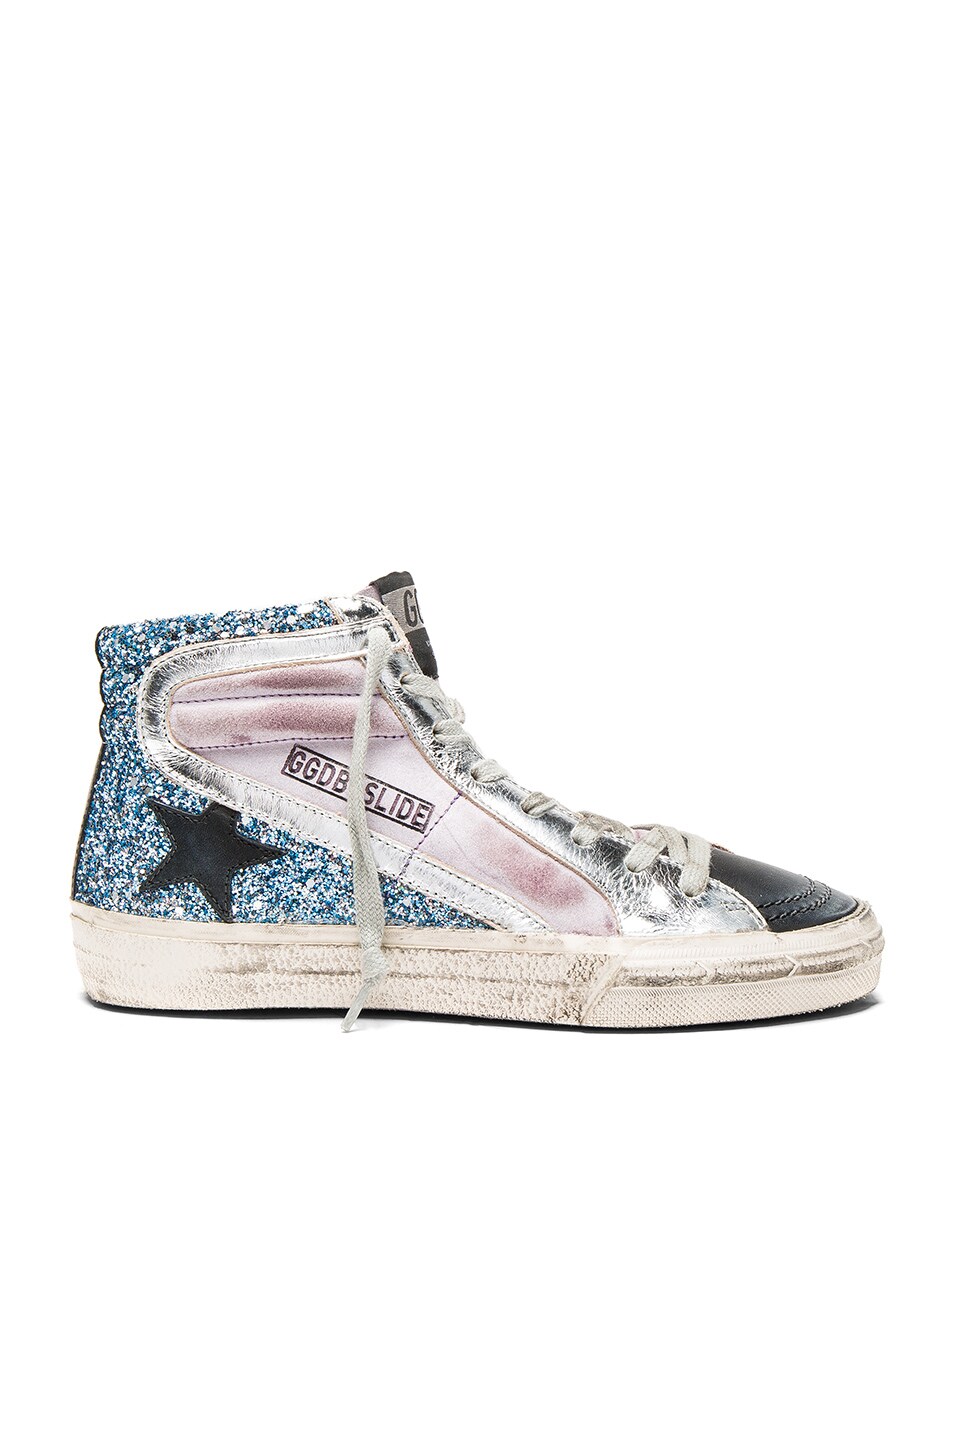 Image 1 of Golden Goose Suede Slide Sneakers in Blue Glitter & Lilac